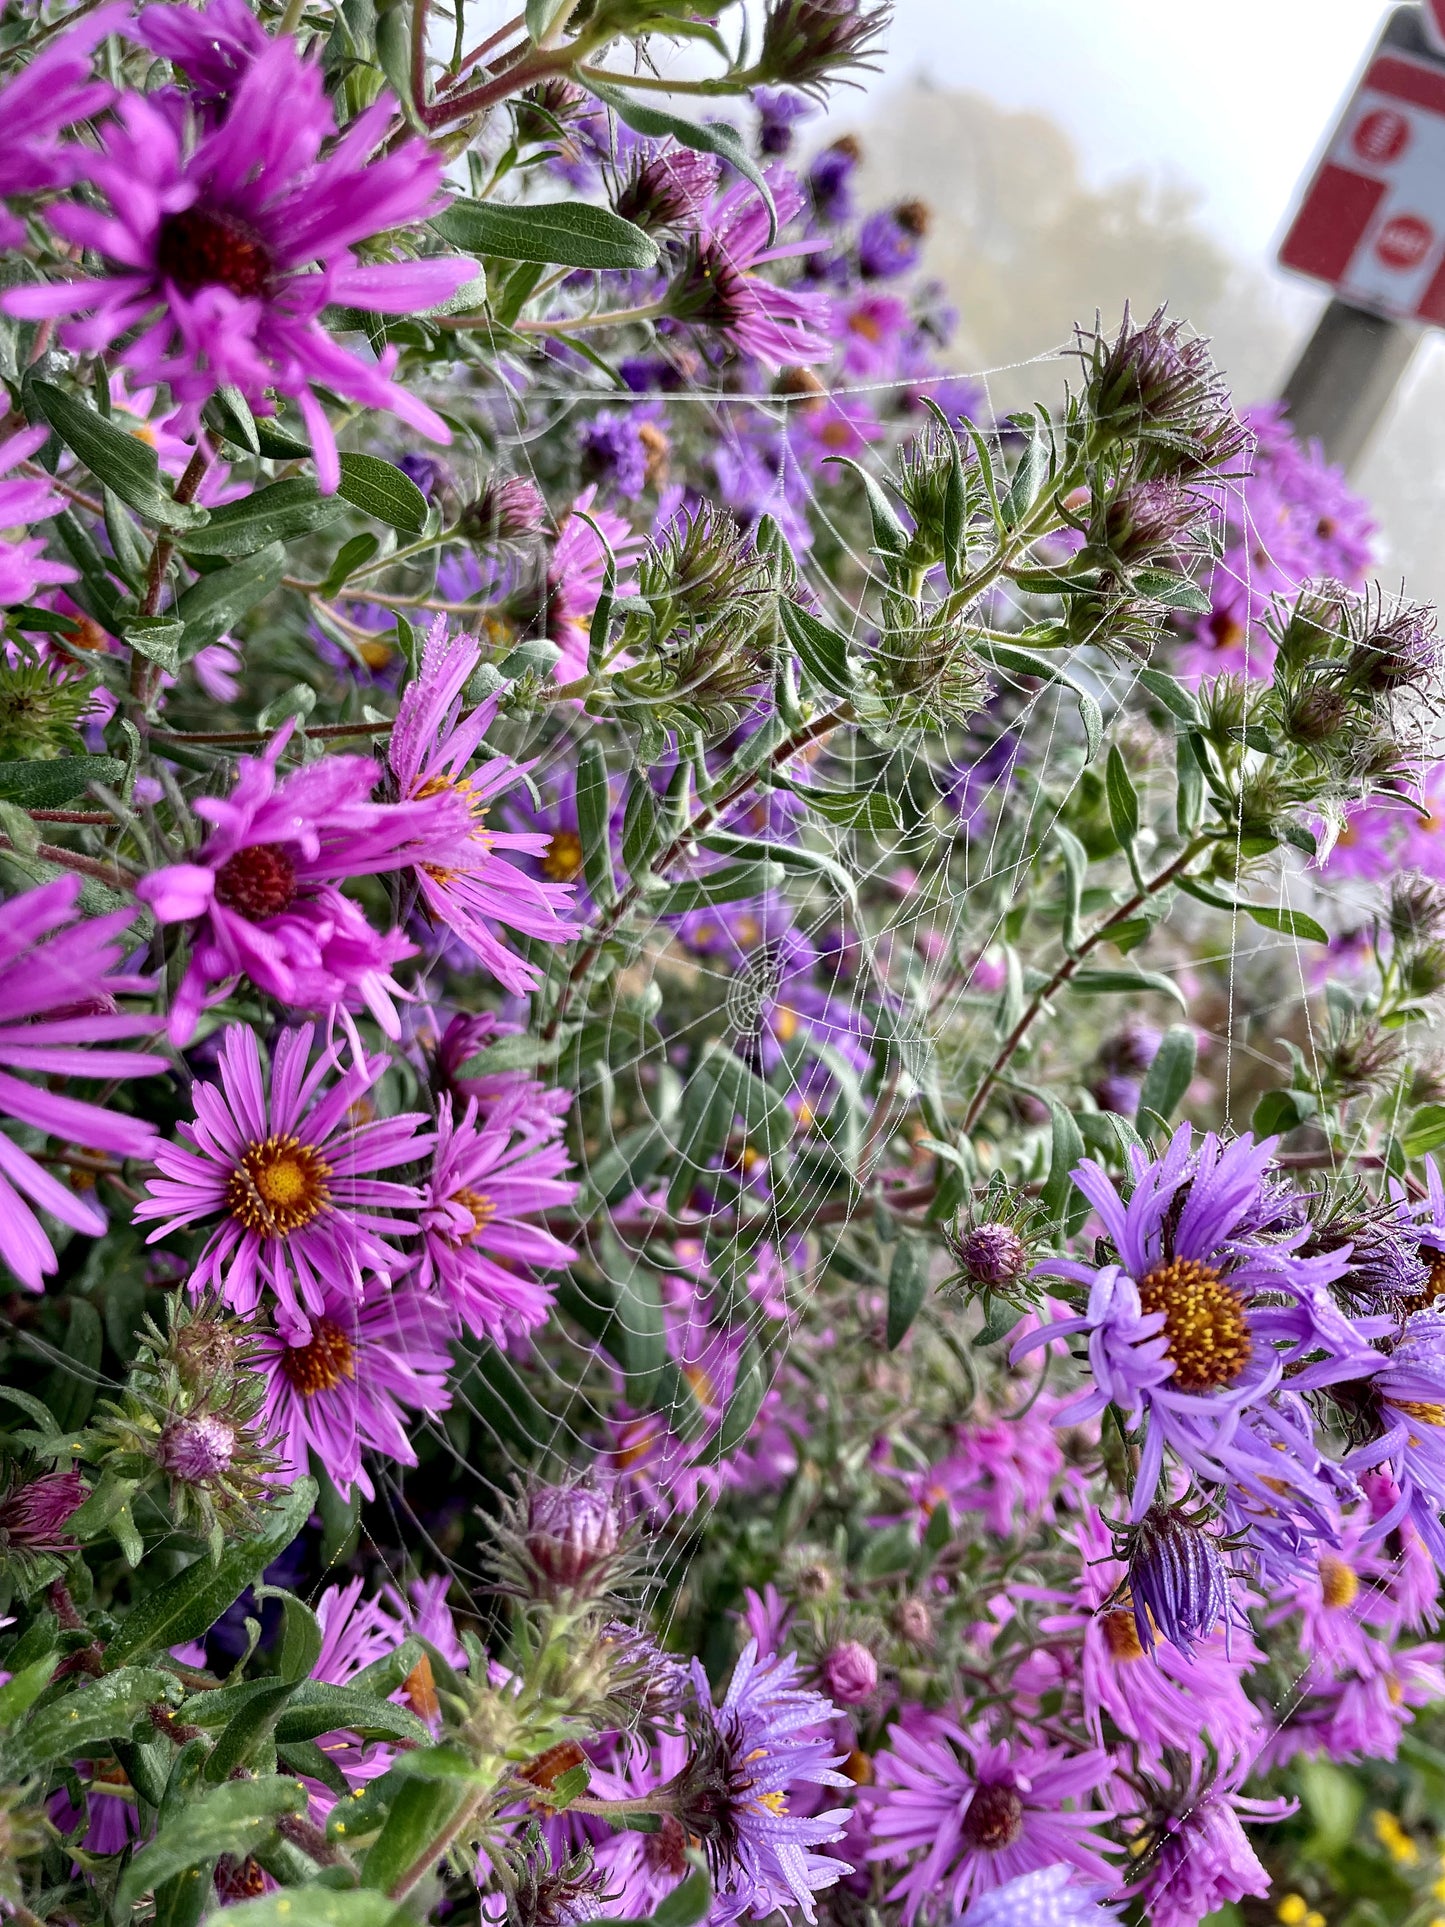 Symphyotrichum novae-angliae / New England Aster / Aster de Nouvelle-Angleterre